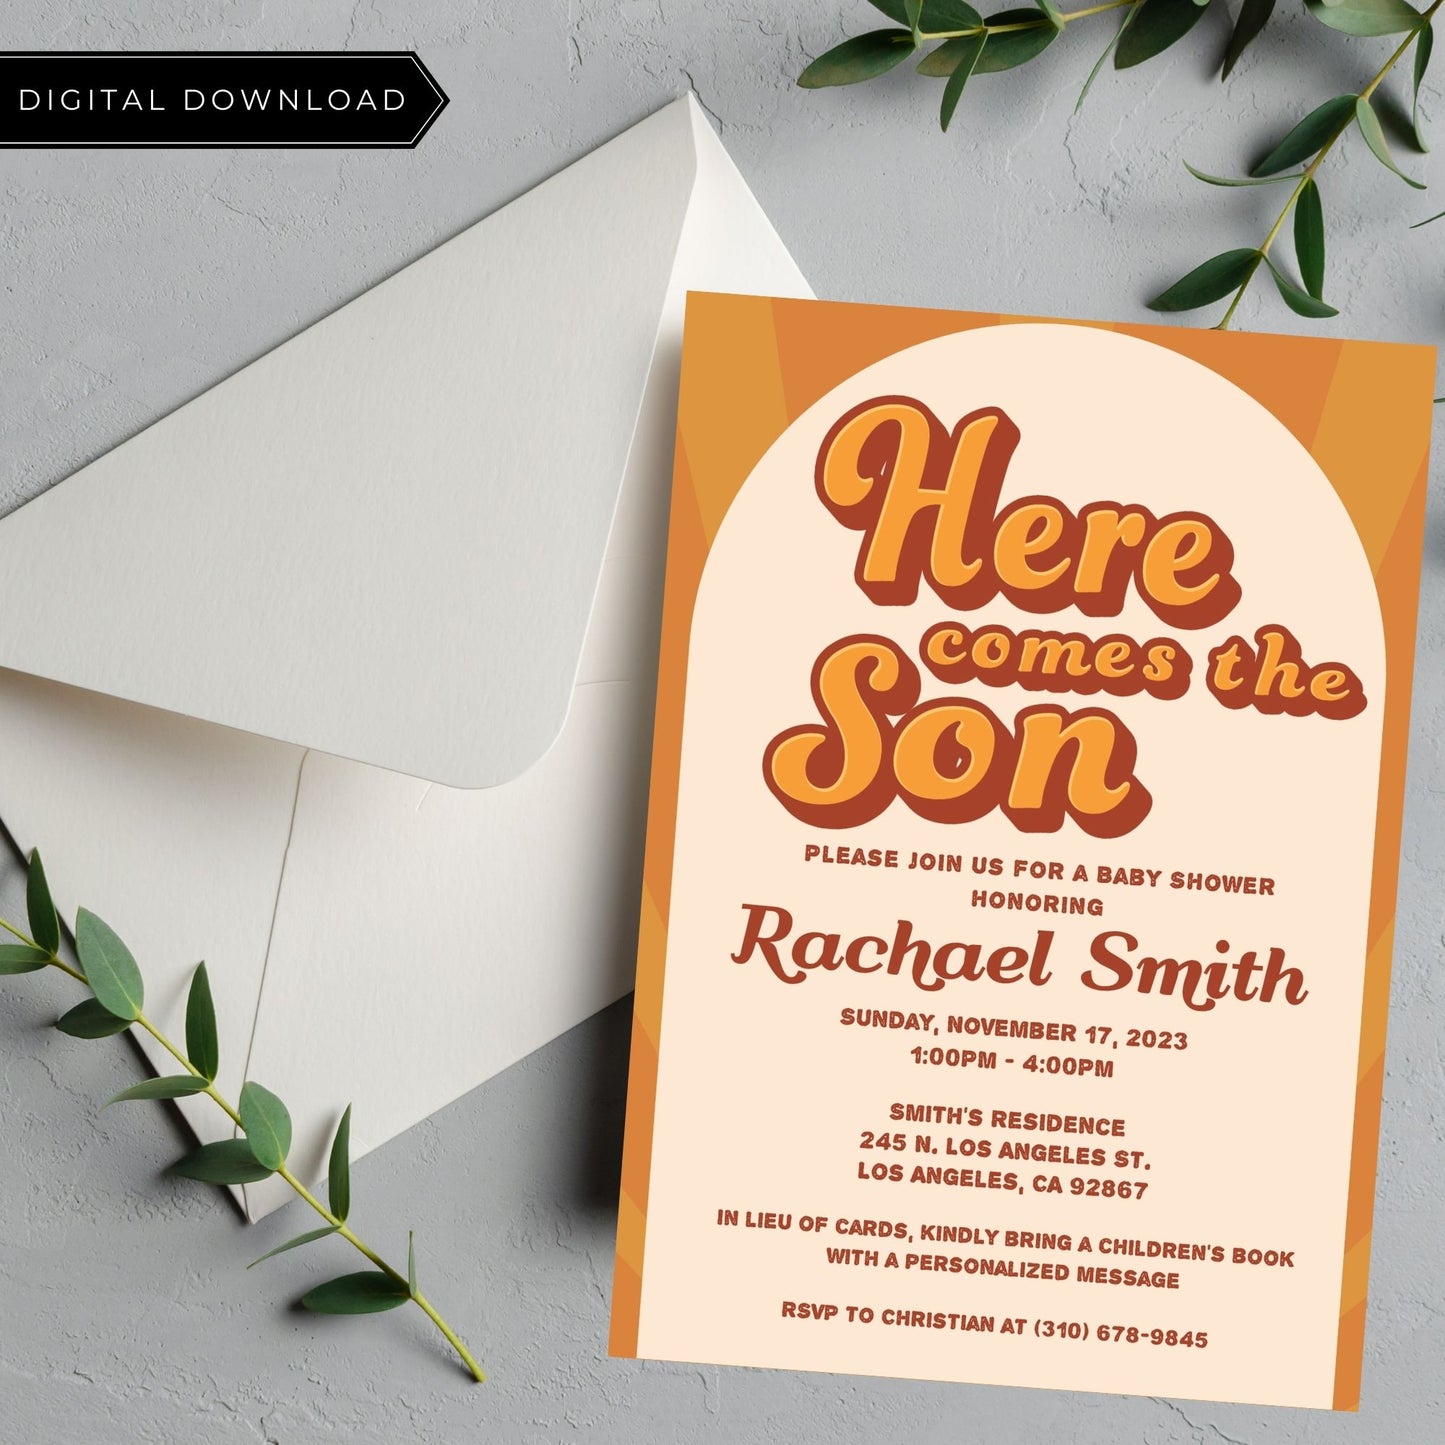 Here Comes the Son Baby Shower Invitation 5x7